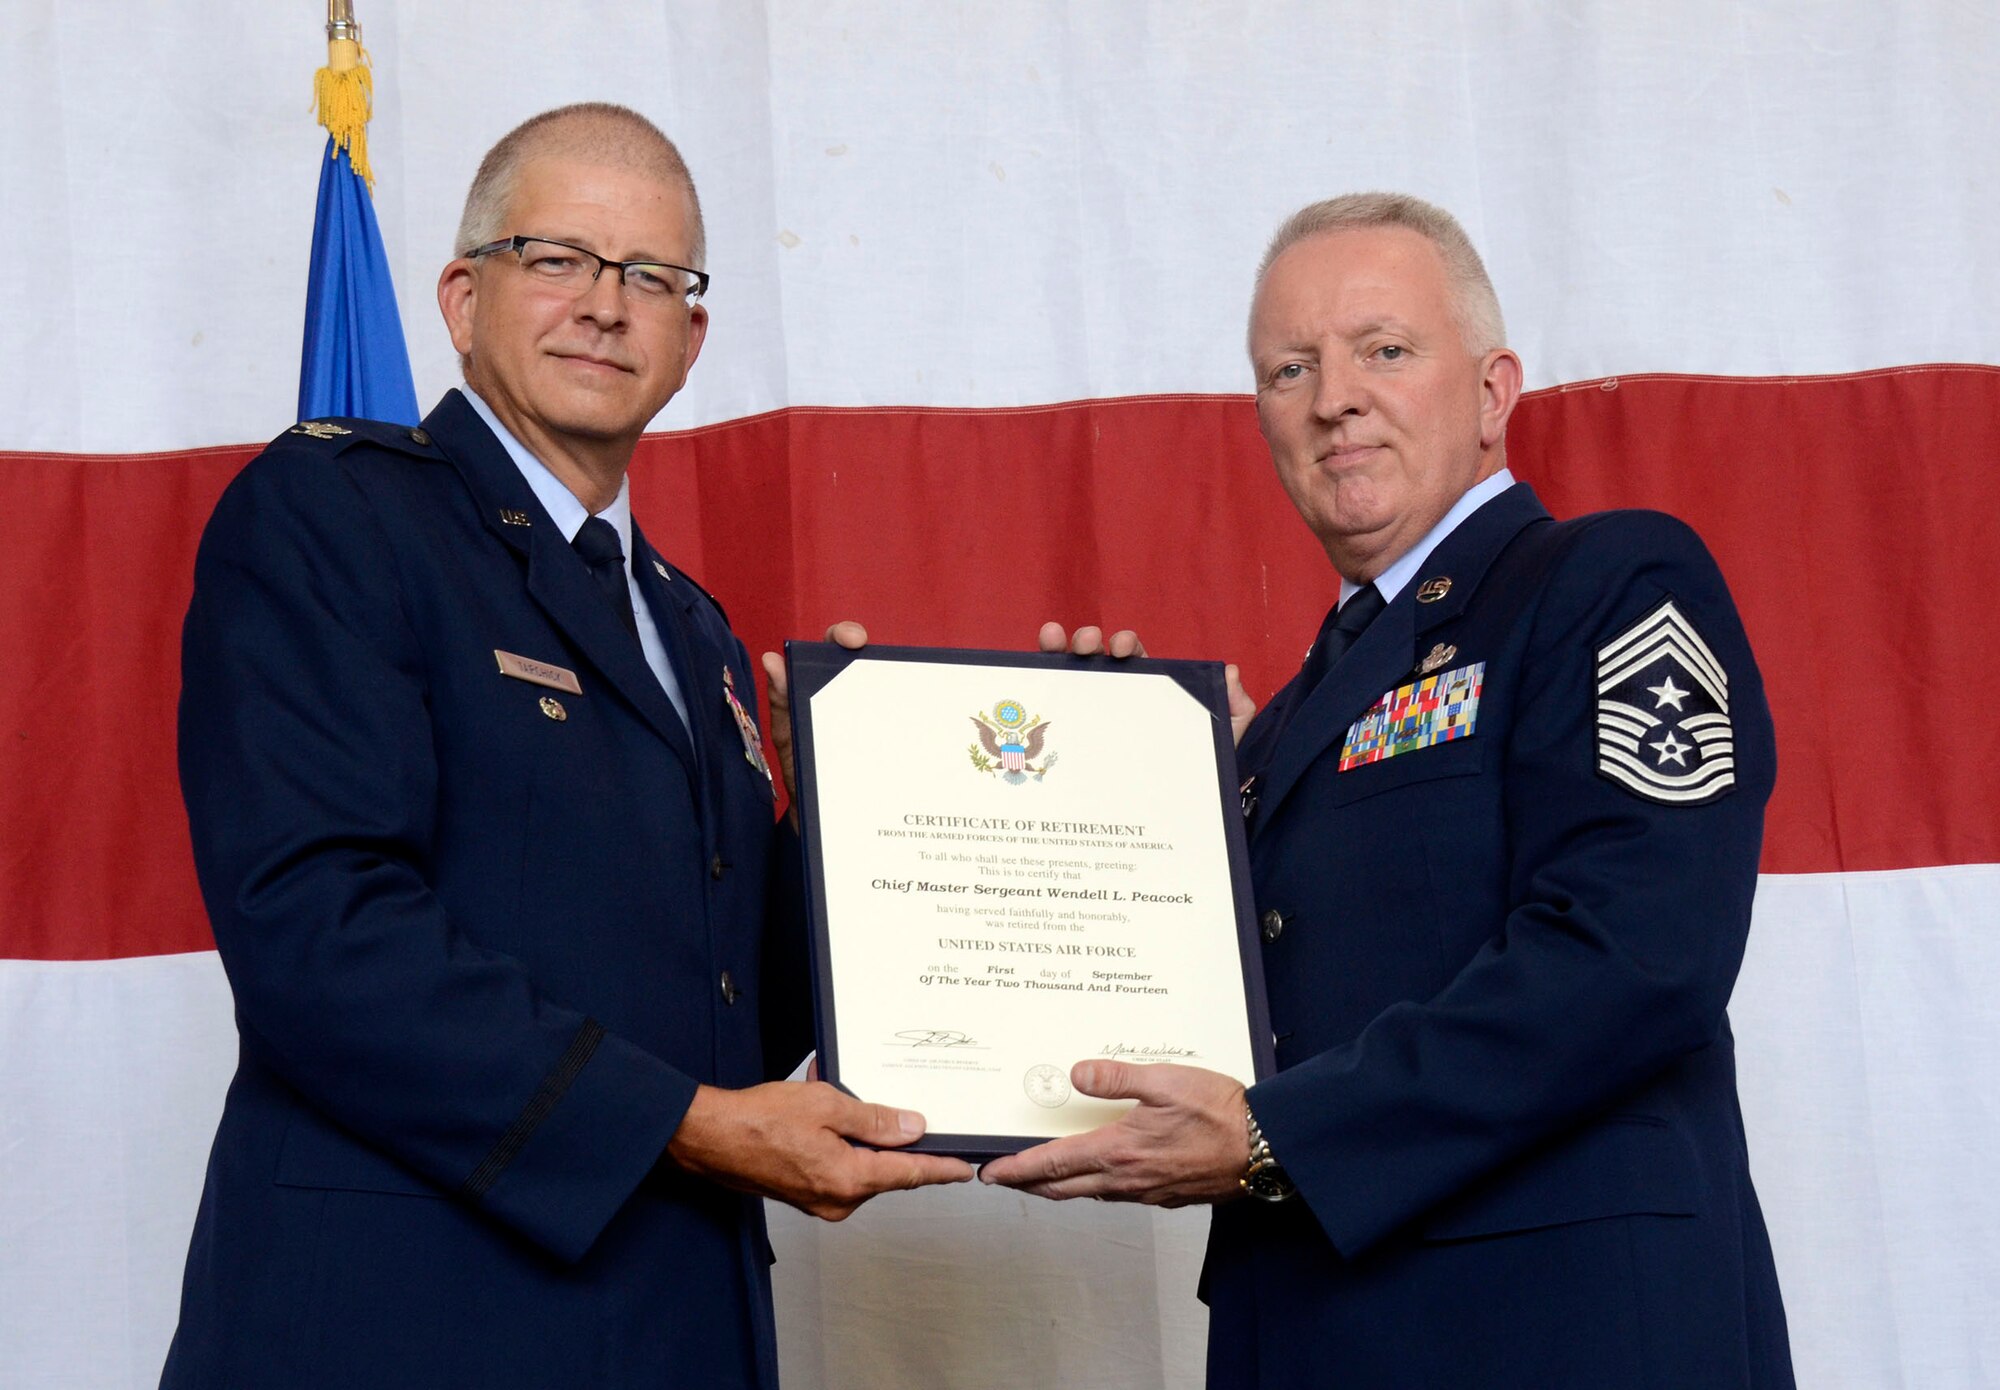 Col. (Ret) Timothy Tarchick, former 94th Airlift Wing commander, presents the certificate of retirement to Chief Master Sgt. Wendell Peacock, 94th Airlift Wing command chief, during his retirement ceremony at Dobbins Air Reserve Base, Aug. 2, 2014. “We’re here to celebrate a brave and honorable man’s career,” said Tarchick, who presided over the ceremony. “In February 2011, I hired a fantastic leader to maintain the readiness of our enlisted force - a man of character, integrity, and trustworthiness.” (U.S. Air Force photo/Don Peek)